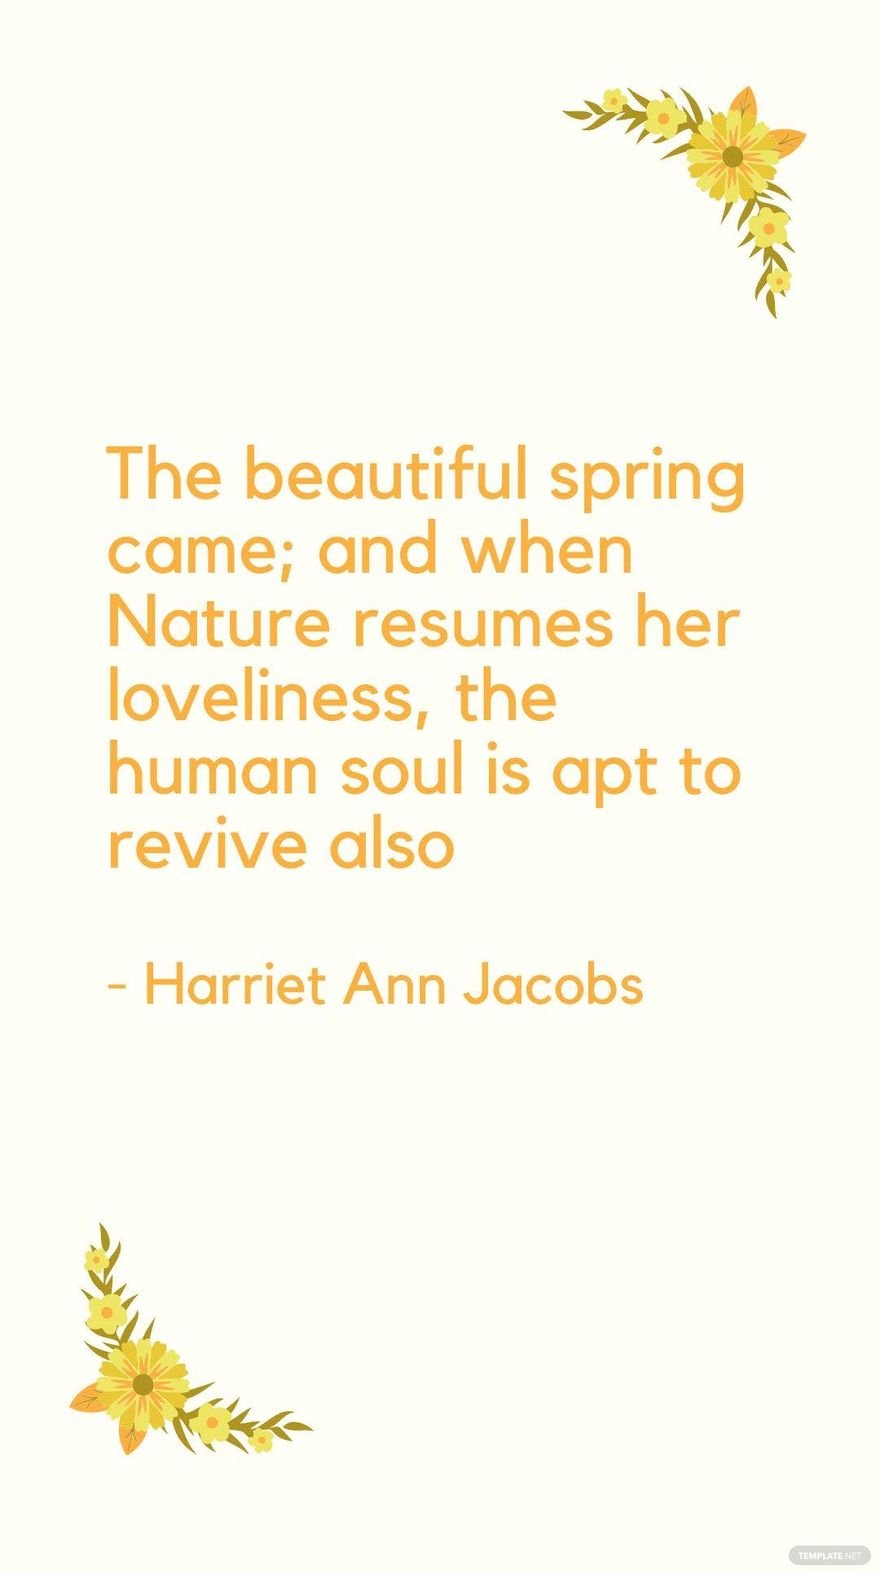 Free Harriet Ann Jacobs - The beautiful spring came; and when Nature resumes her loveliness, the human soul is apt to revive also in JPG